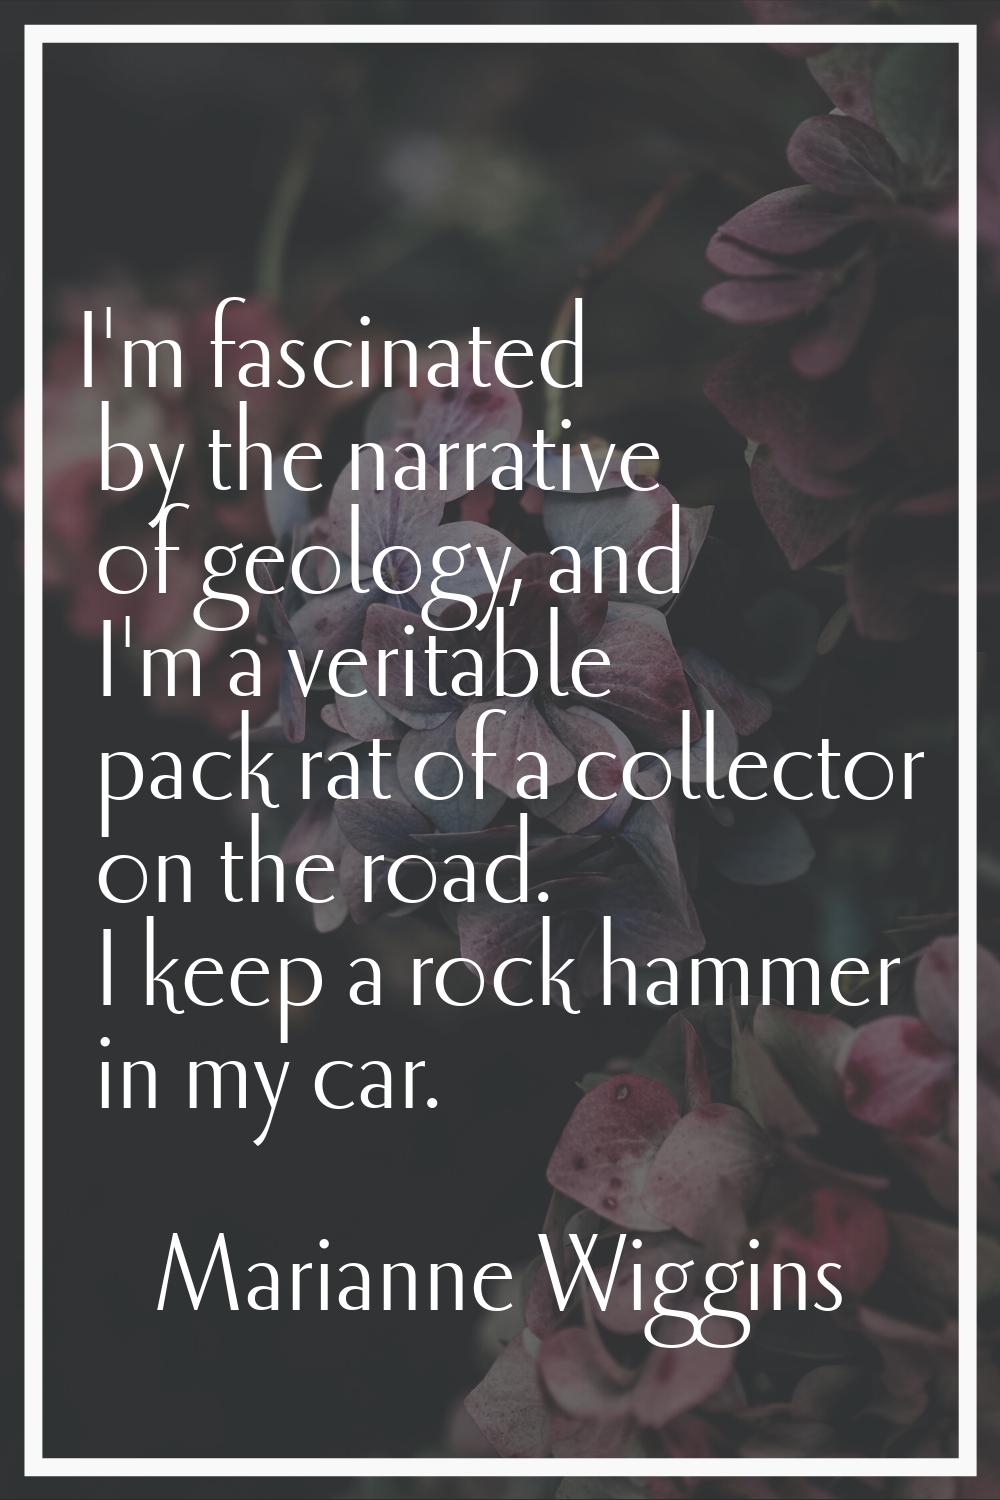 I'm fascinated by the narrative of geology, and I'm a veritable pack rat of a collector on the road